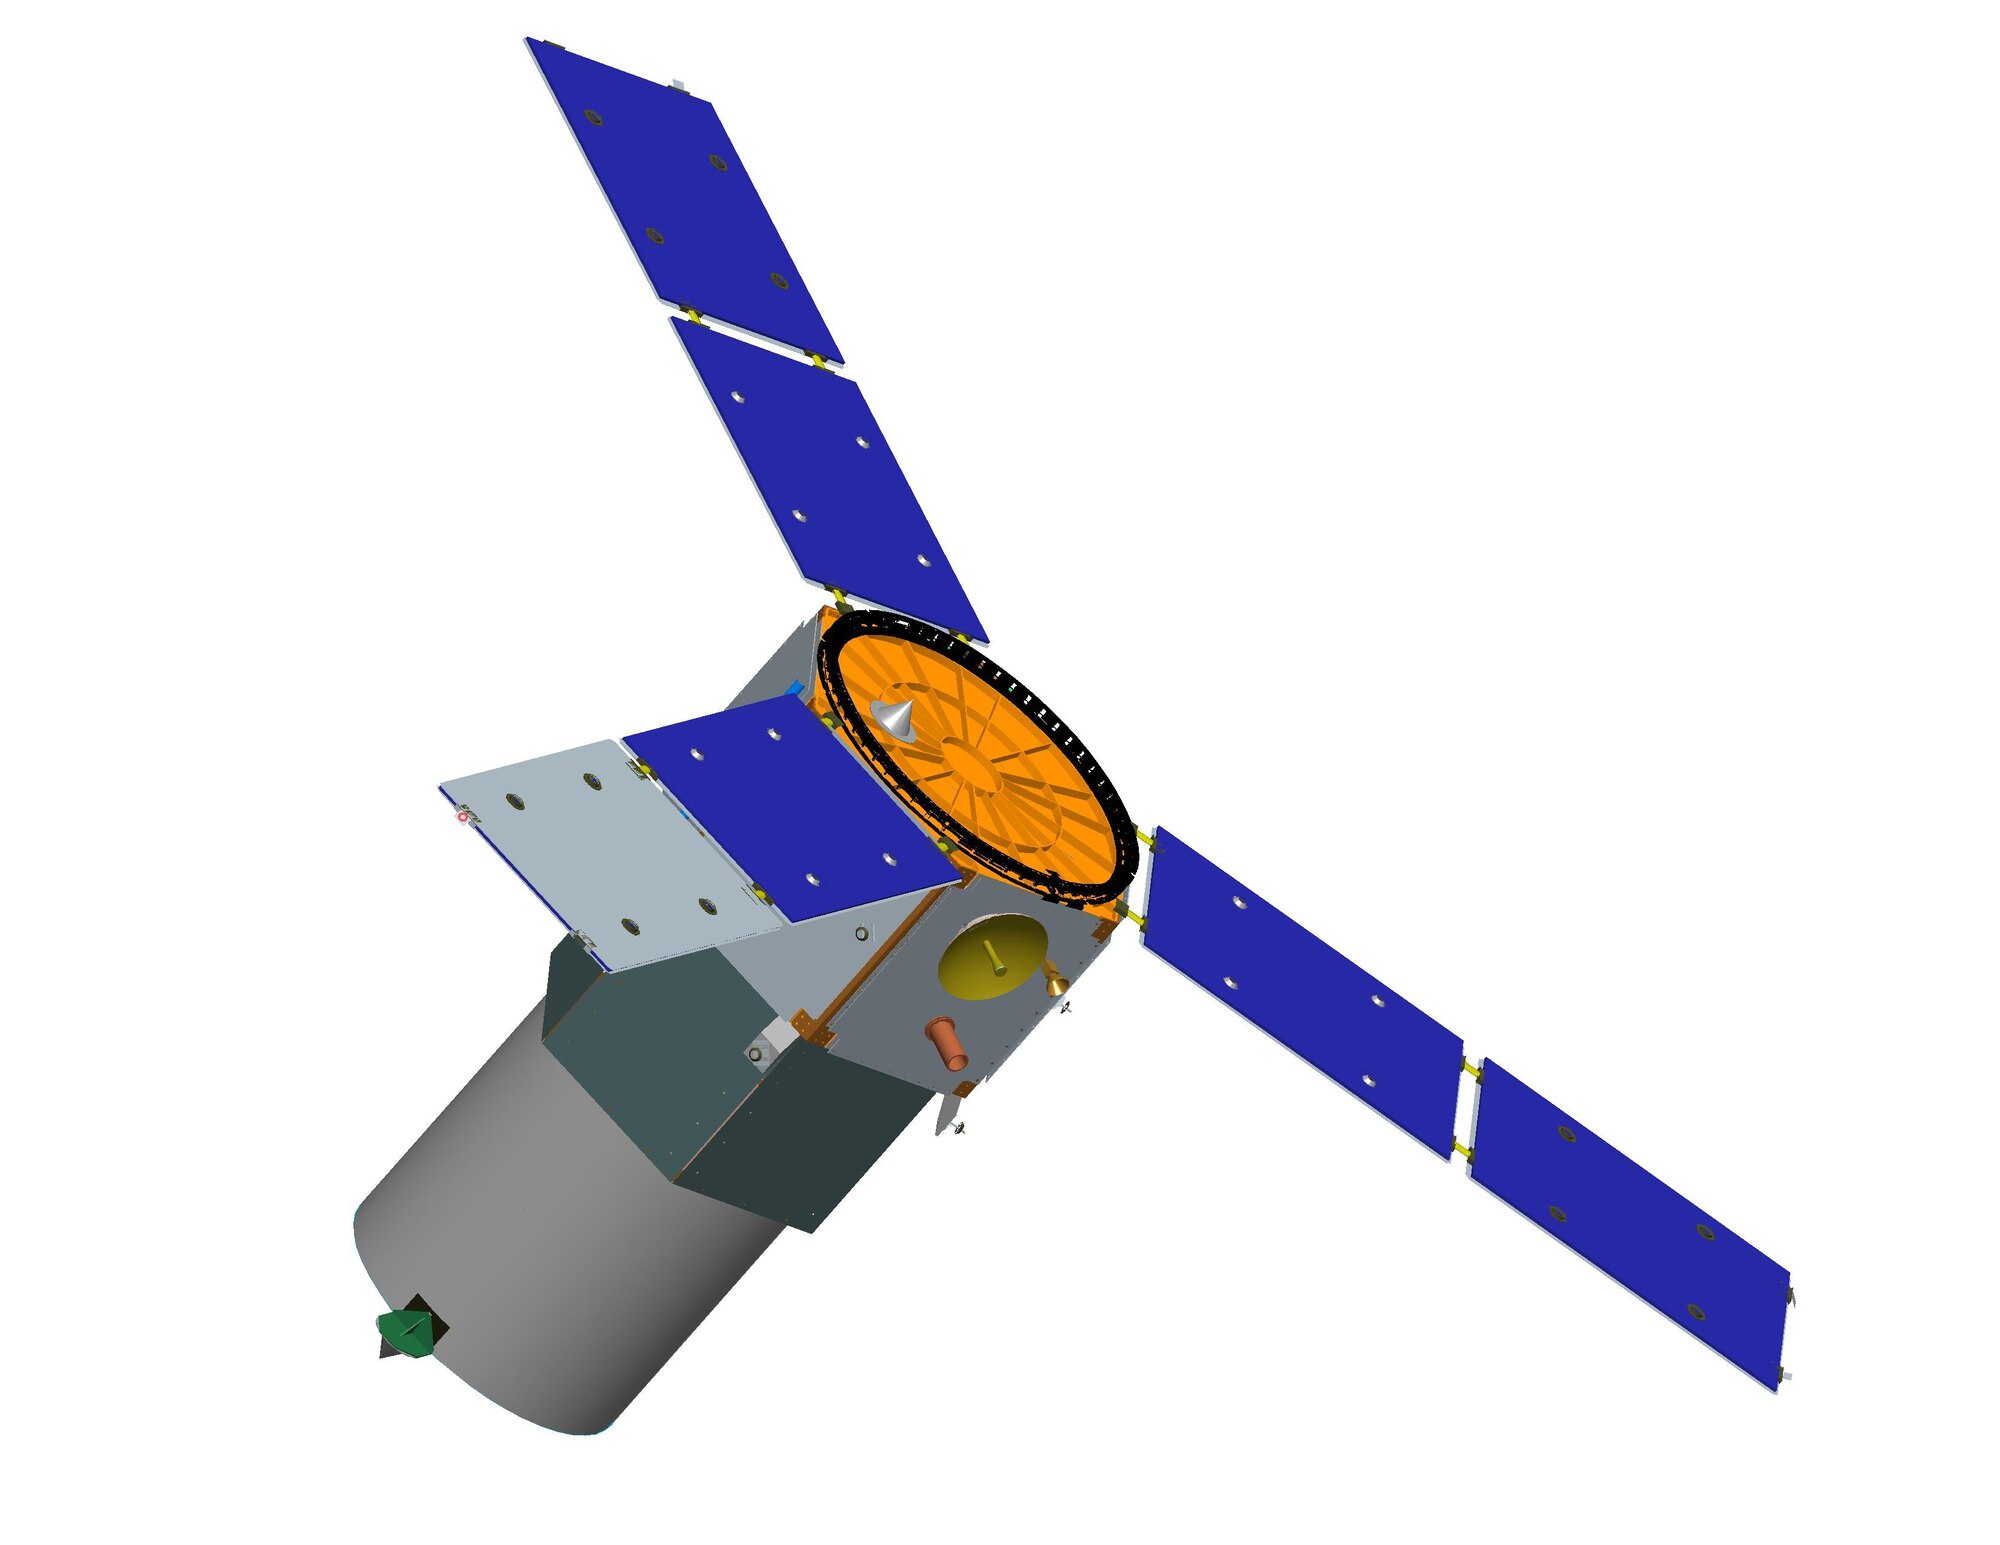 The 880-pound experimental Tactical Satellite-3 developed by Air Force Research Laboratory and launched in May 2009 transfers to operational status under the operational control of Air Force Space Command in June 2010. (U.S. Air Force graphic)